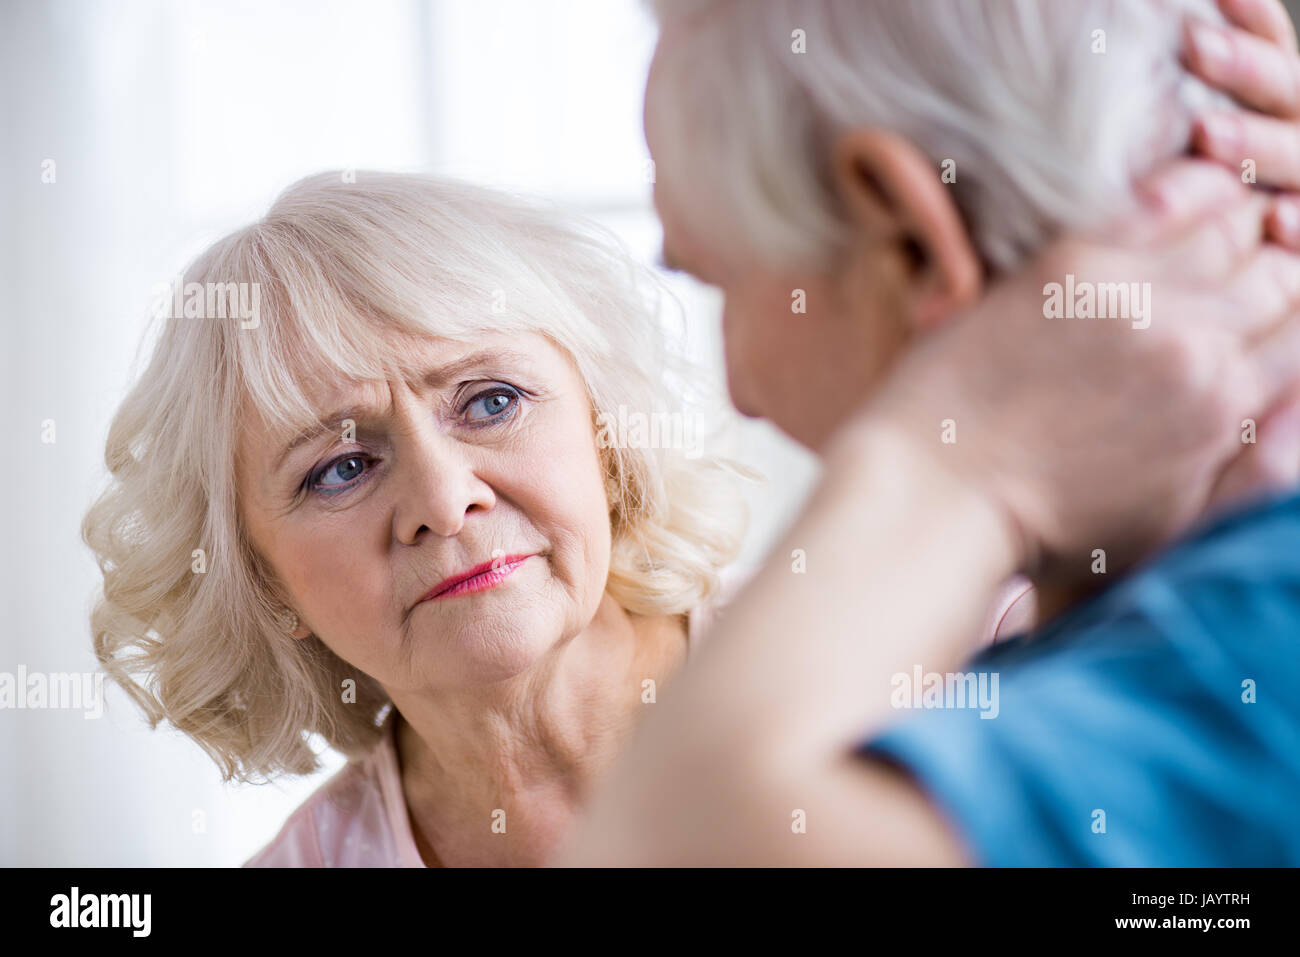 Back view of man with neck pain and concerned woman at home Stock Photo